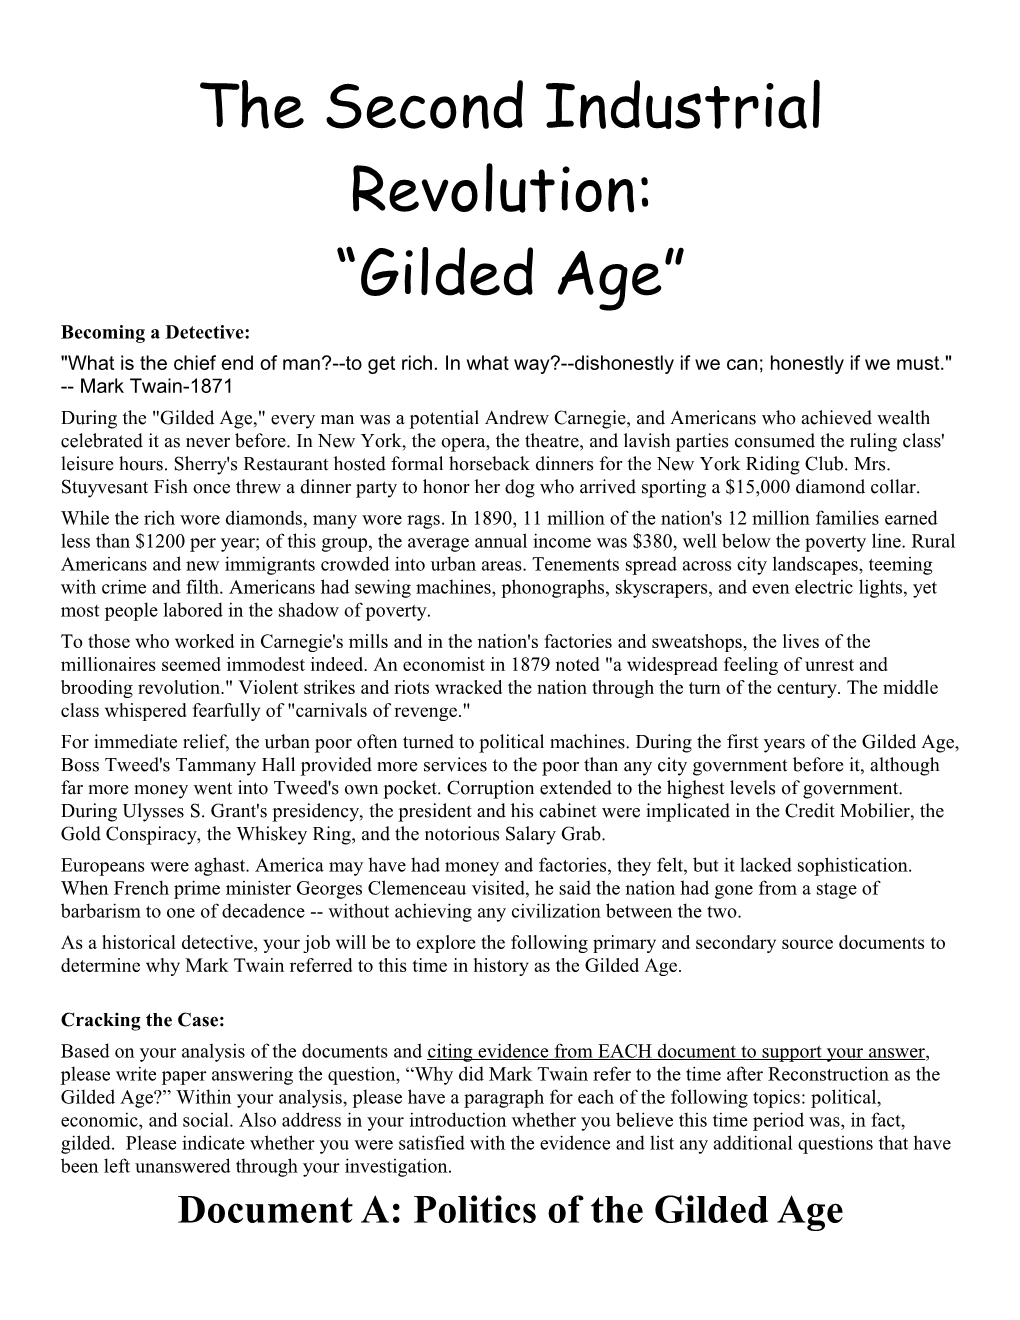 The Second Industrial Revolution: Gilded Age